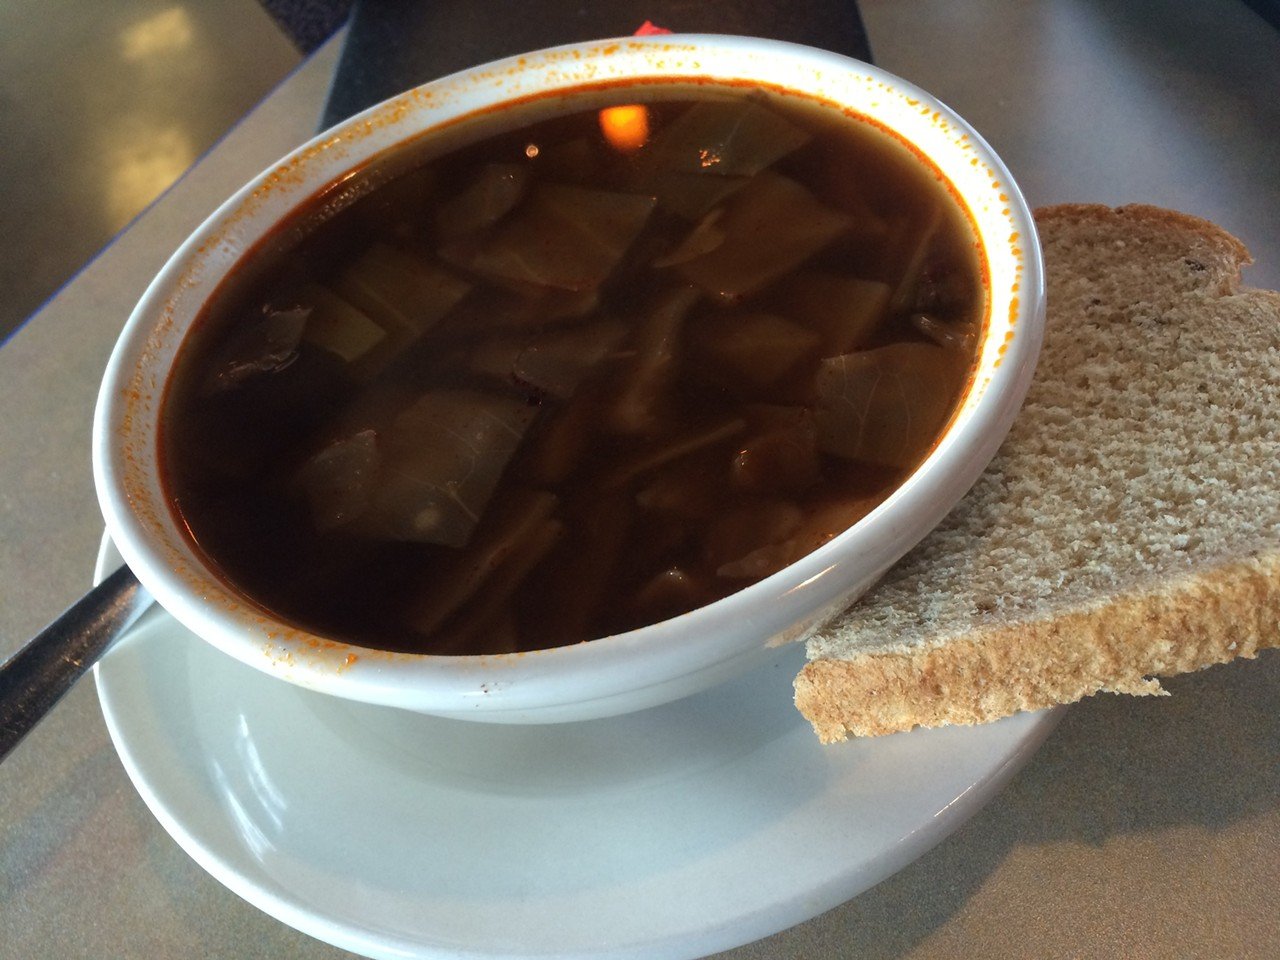 Sweet-n-Sour Cabbage Soup from Izzy's
Multiple locations including 800 Elm St., Downtown; 7651 Mall Road Florence; 1198 Smiley Ave., Forest Park; 4766 Red Bank Expy., Madisonville; 5098 Glencrossing Way, Western Hills
Known for their Reubens, Izzy's has been serving Cincinnatians for over 120 years. And like any good deli, they've got some good soup. Try a cup or a bowl of their sweet and sour cabbage soup. Pair it with one of their famous Reubens or try a specialty sandwich like the Pastrami Delight.